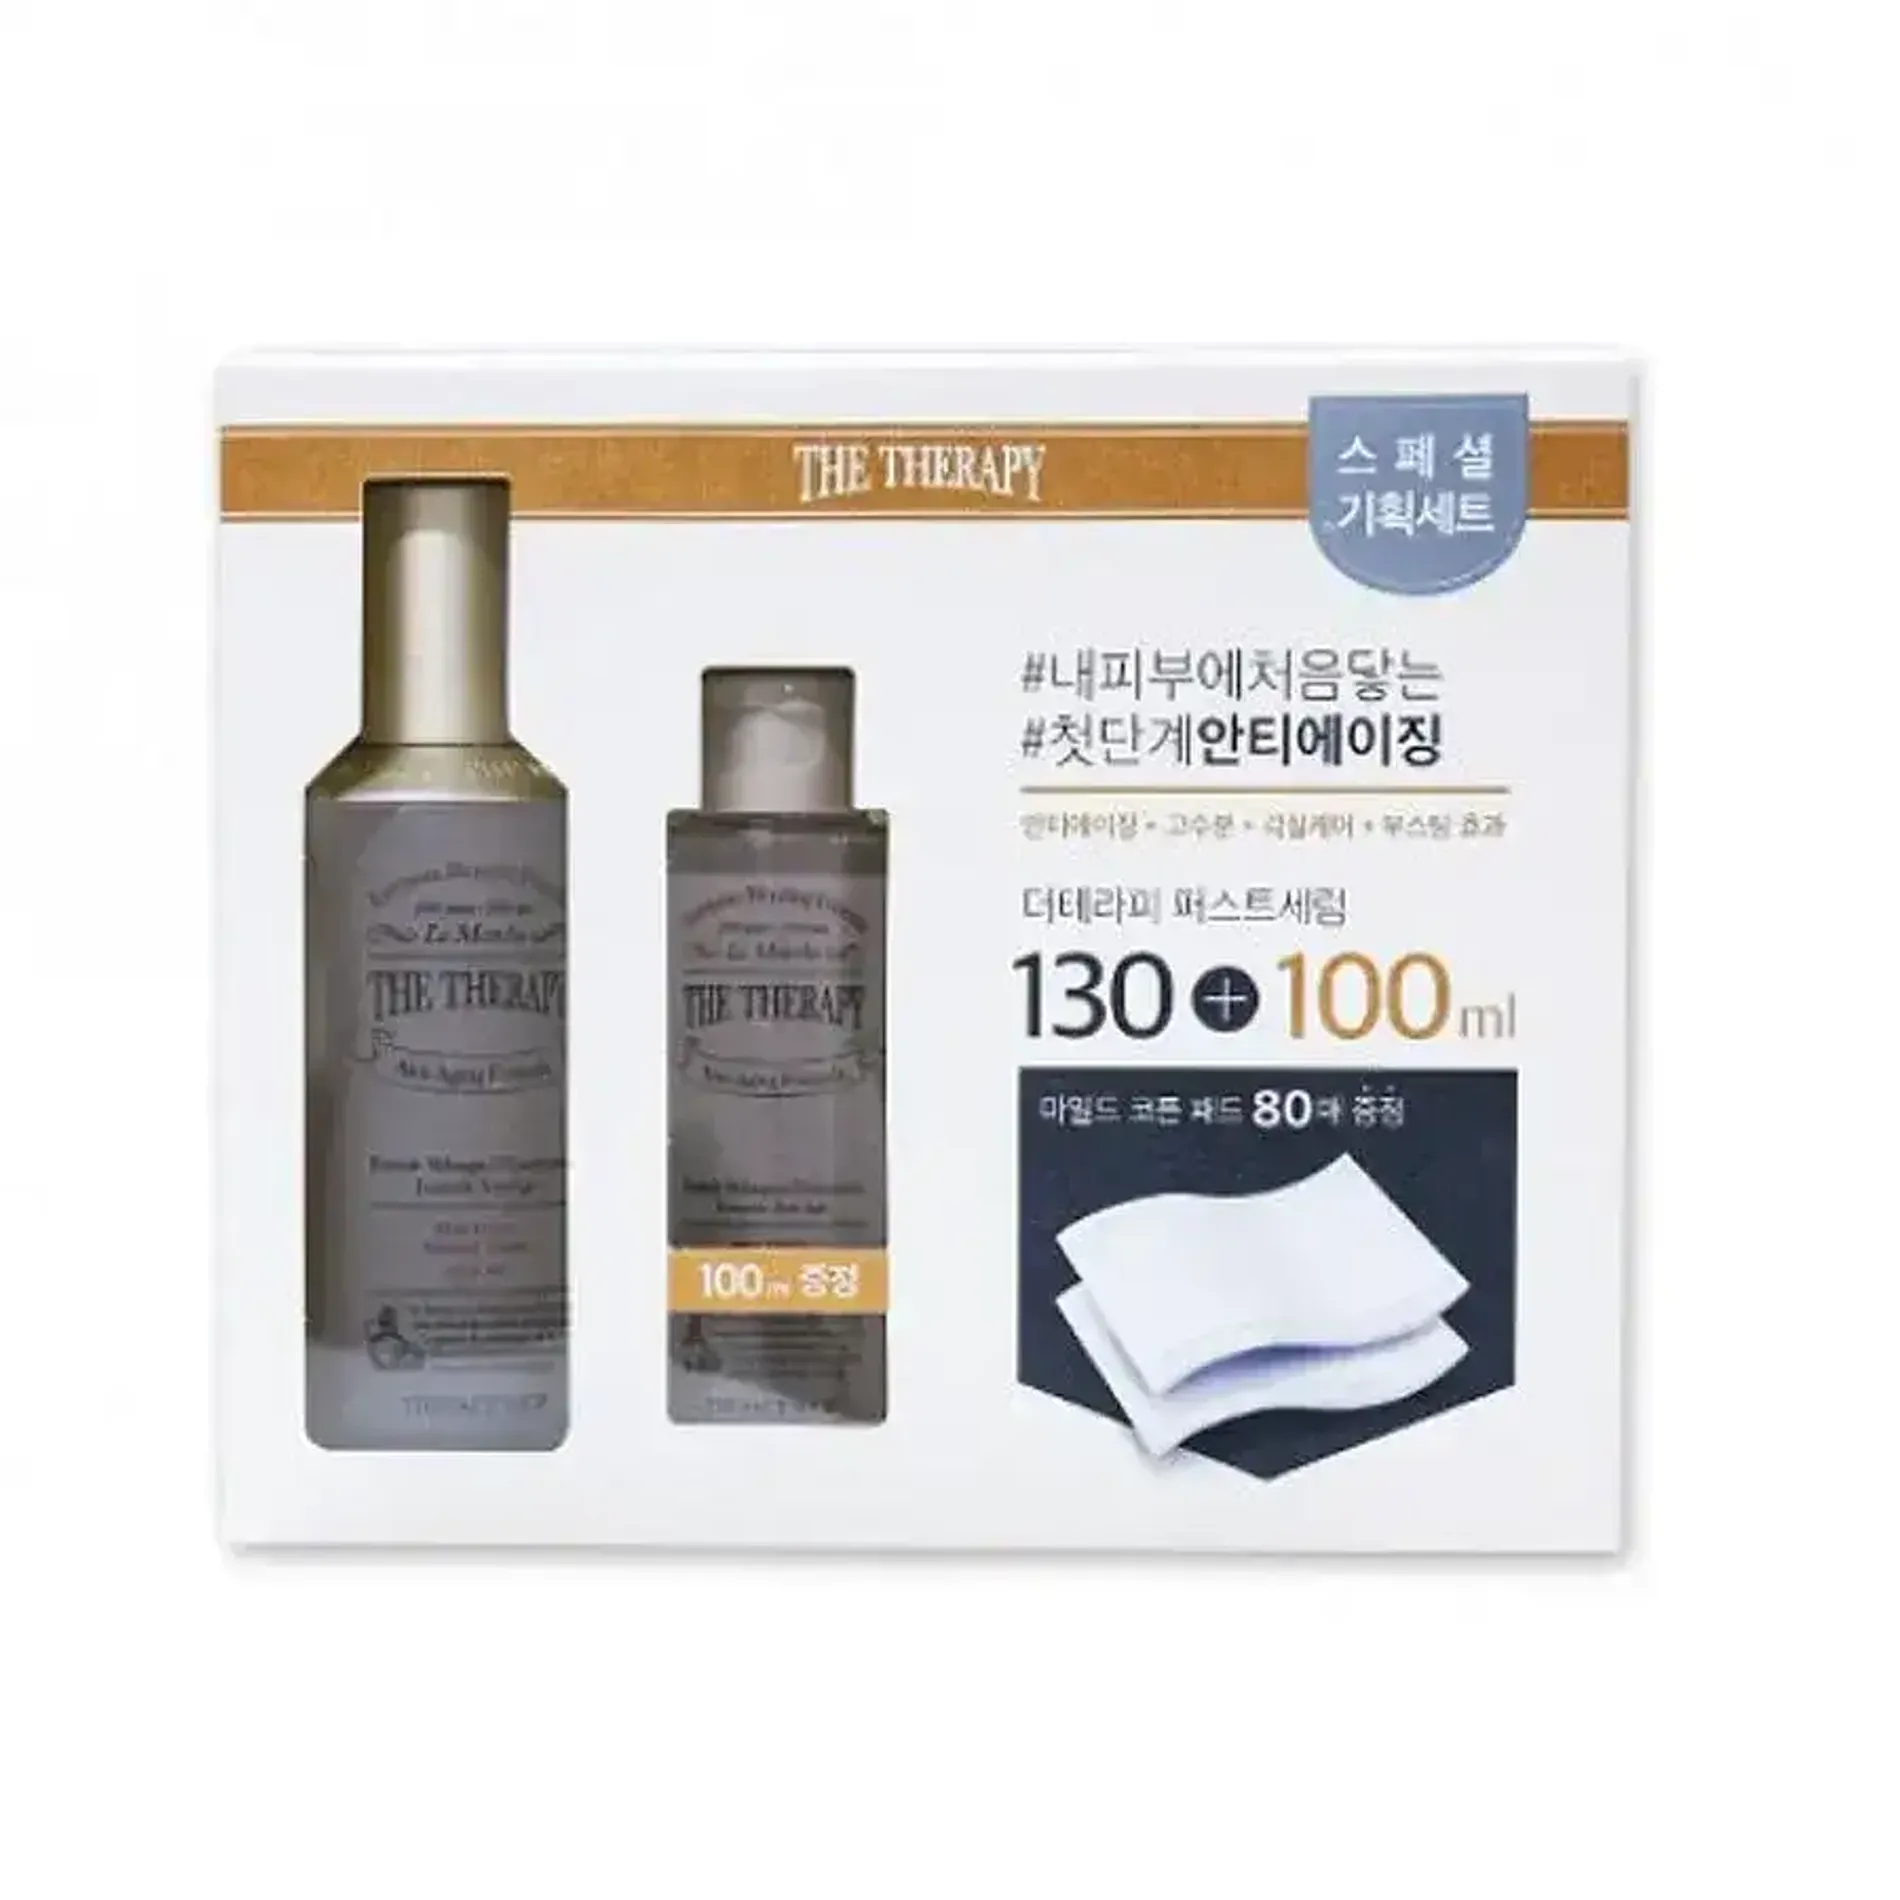 bo-duong-can-bang-phuc-hoi-da-the-therapy-first-serum-special-set-3items-2